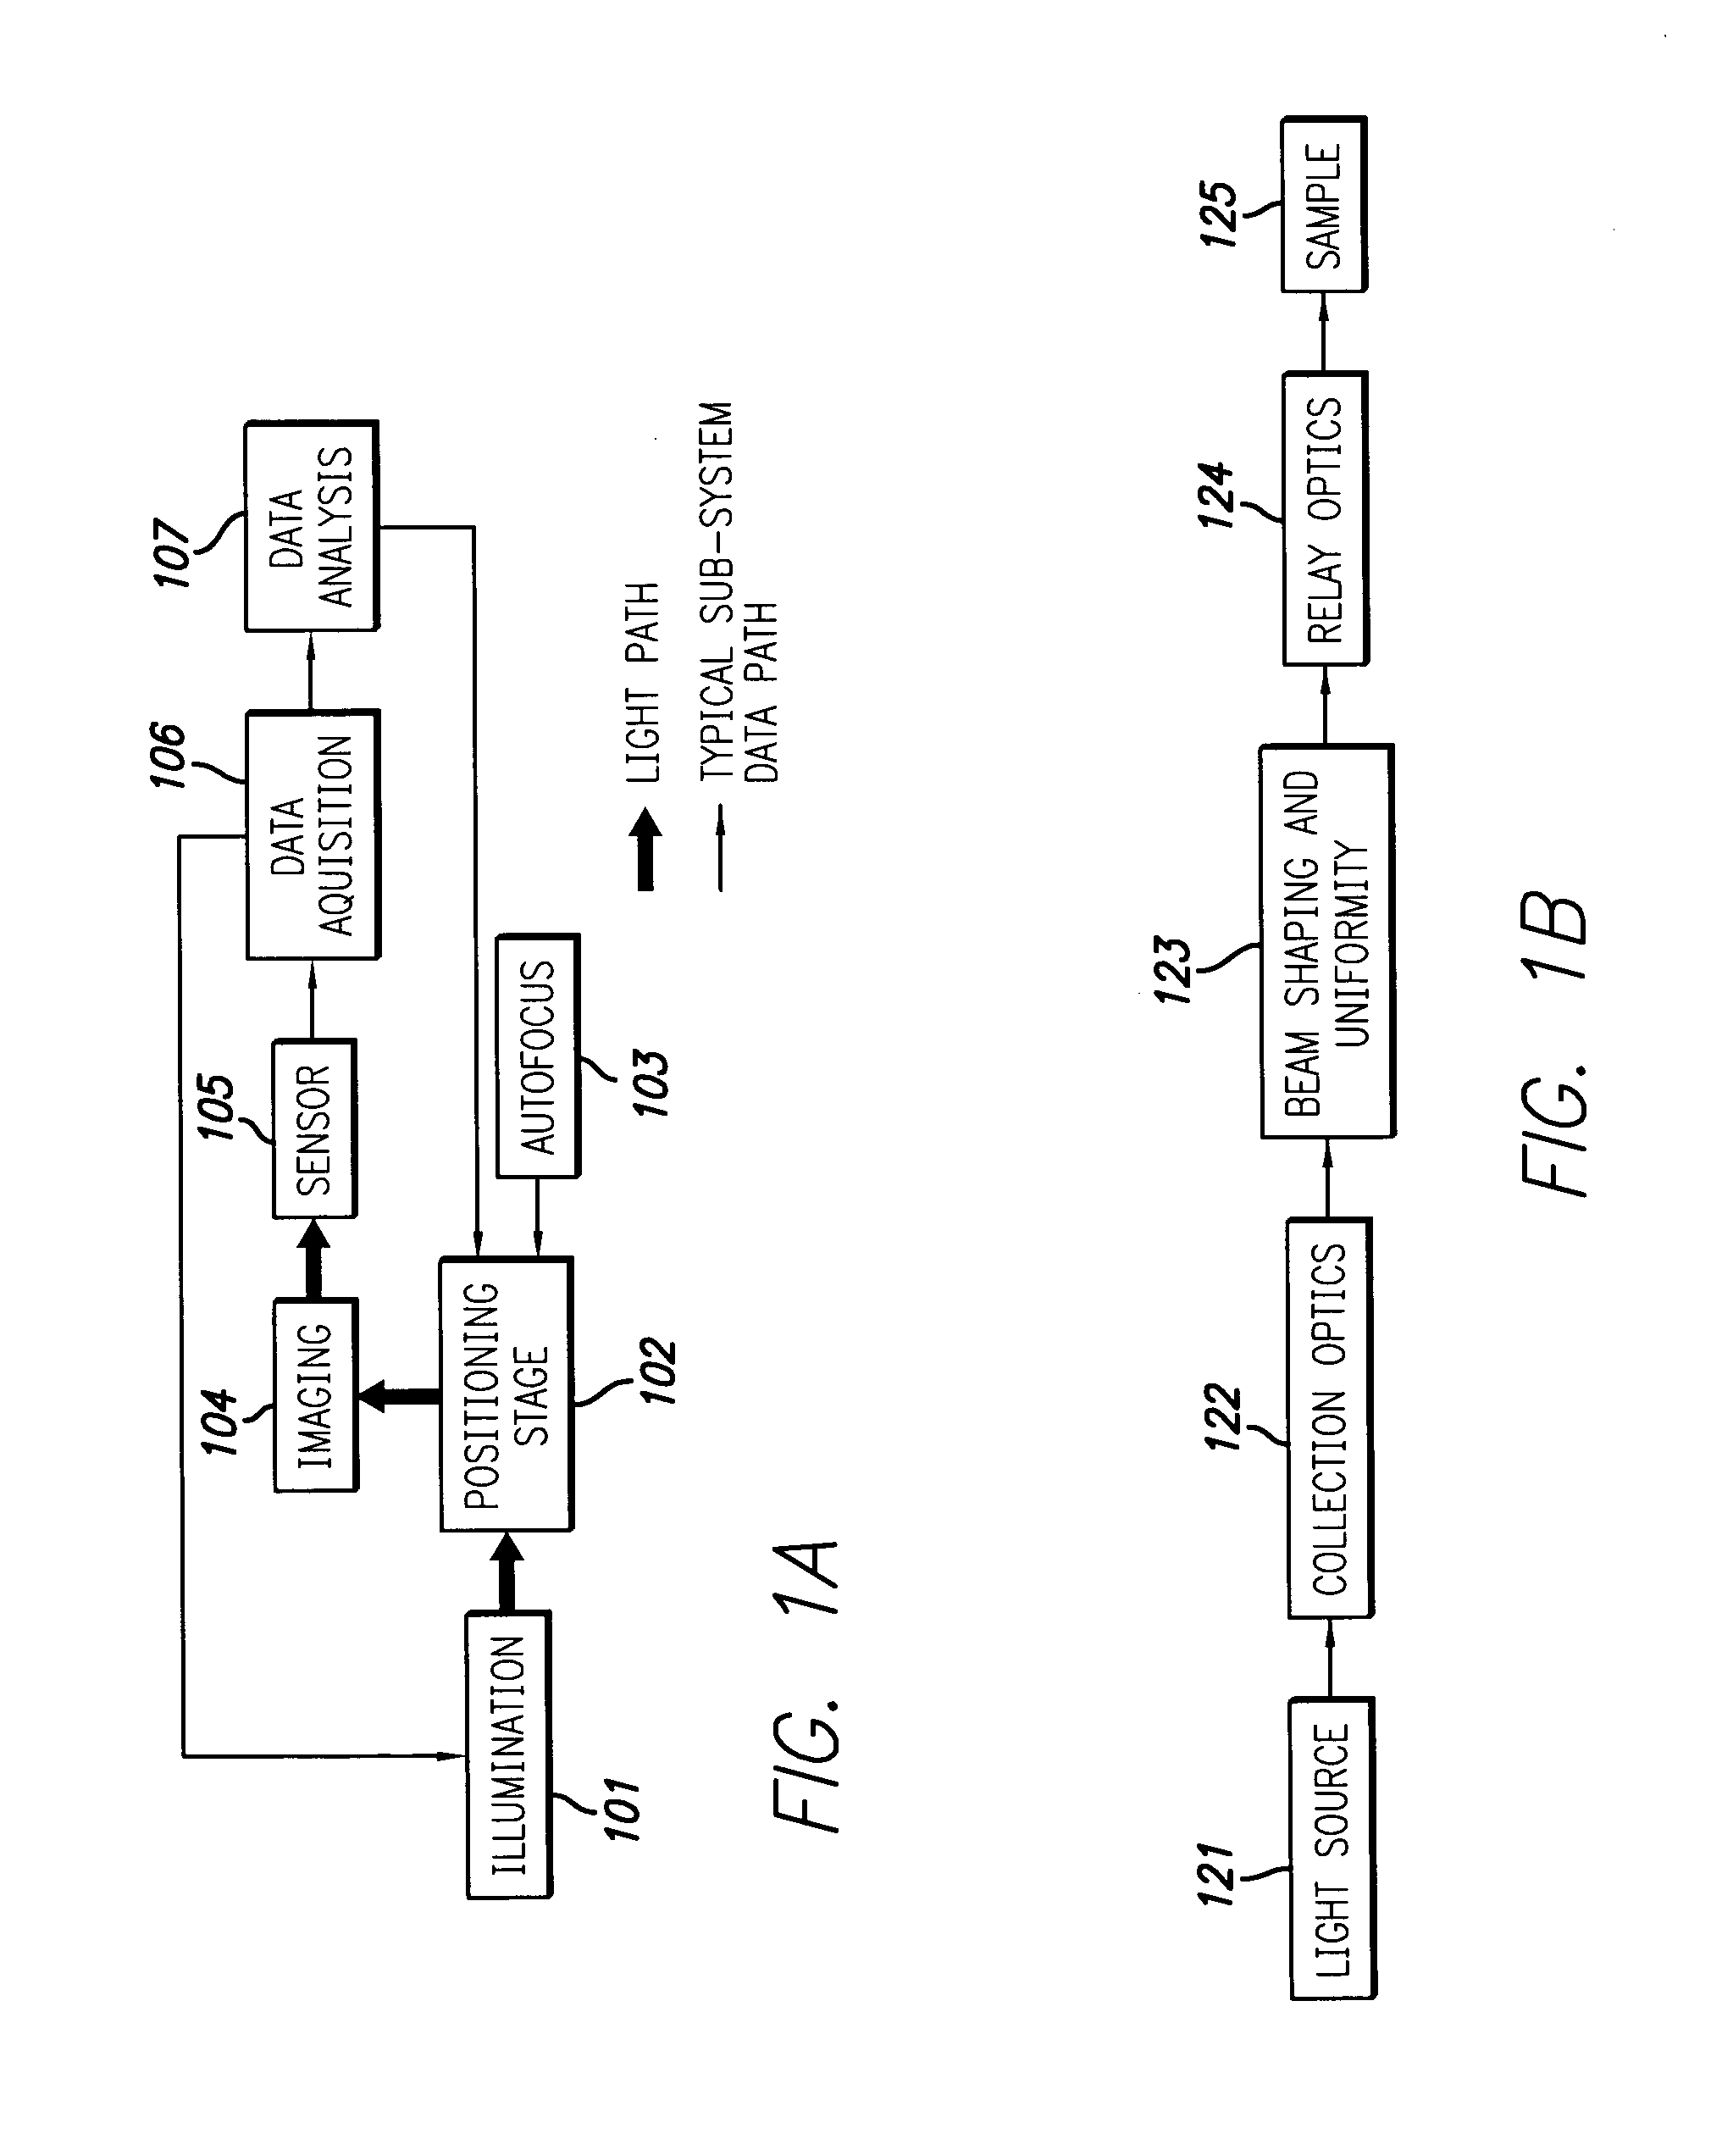 Inspection system using small catadioptric objective